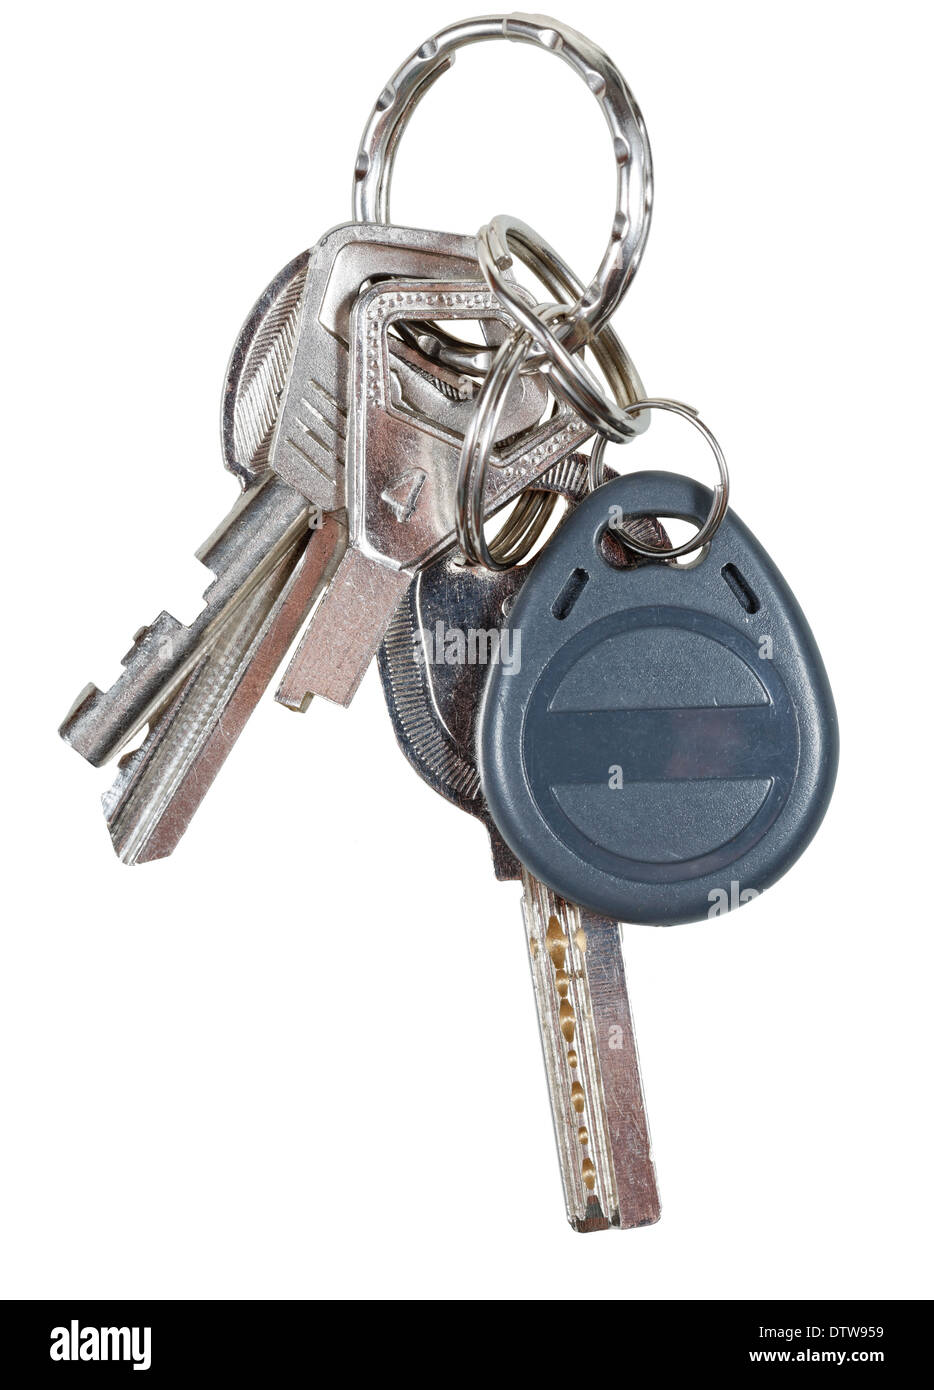 bunch of keys on steel ring and magnetic key isolated on white background Stock Photo